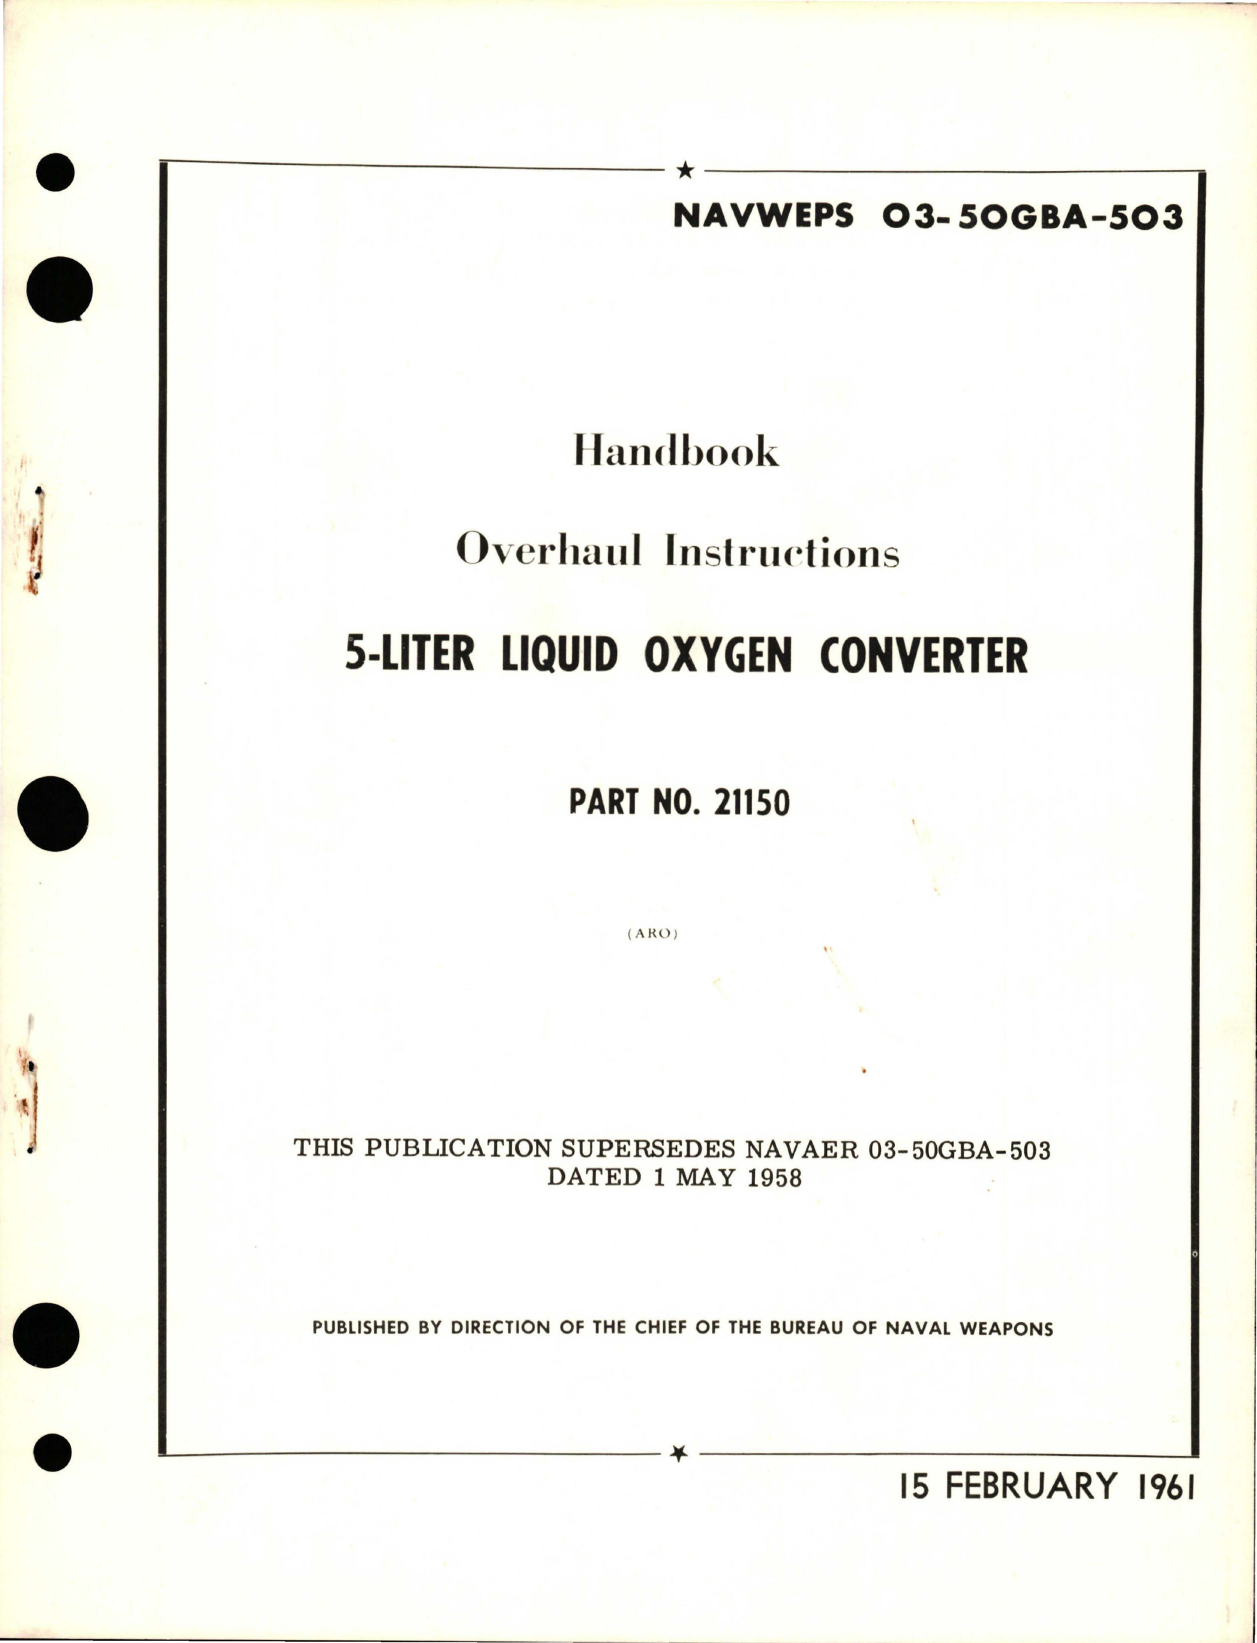 Sample page 1 from AirCorps Library document: Overhaul Instructions for 5-Liter Liquid Oxygen Converter - Part 21150 